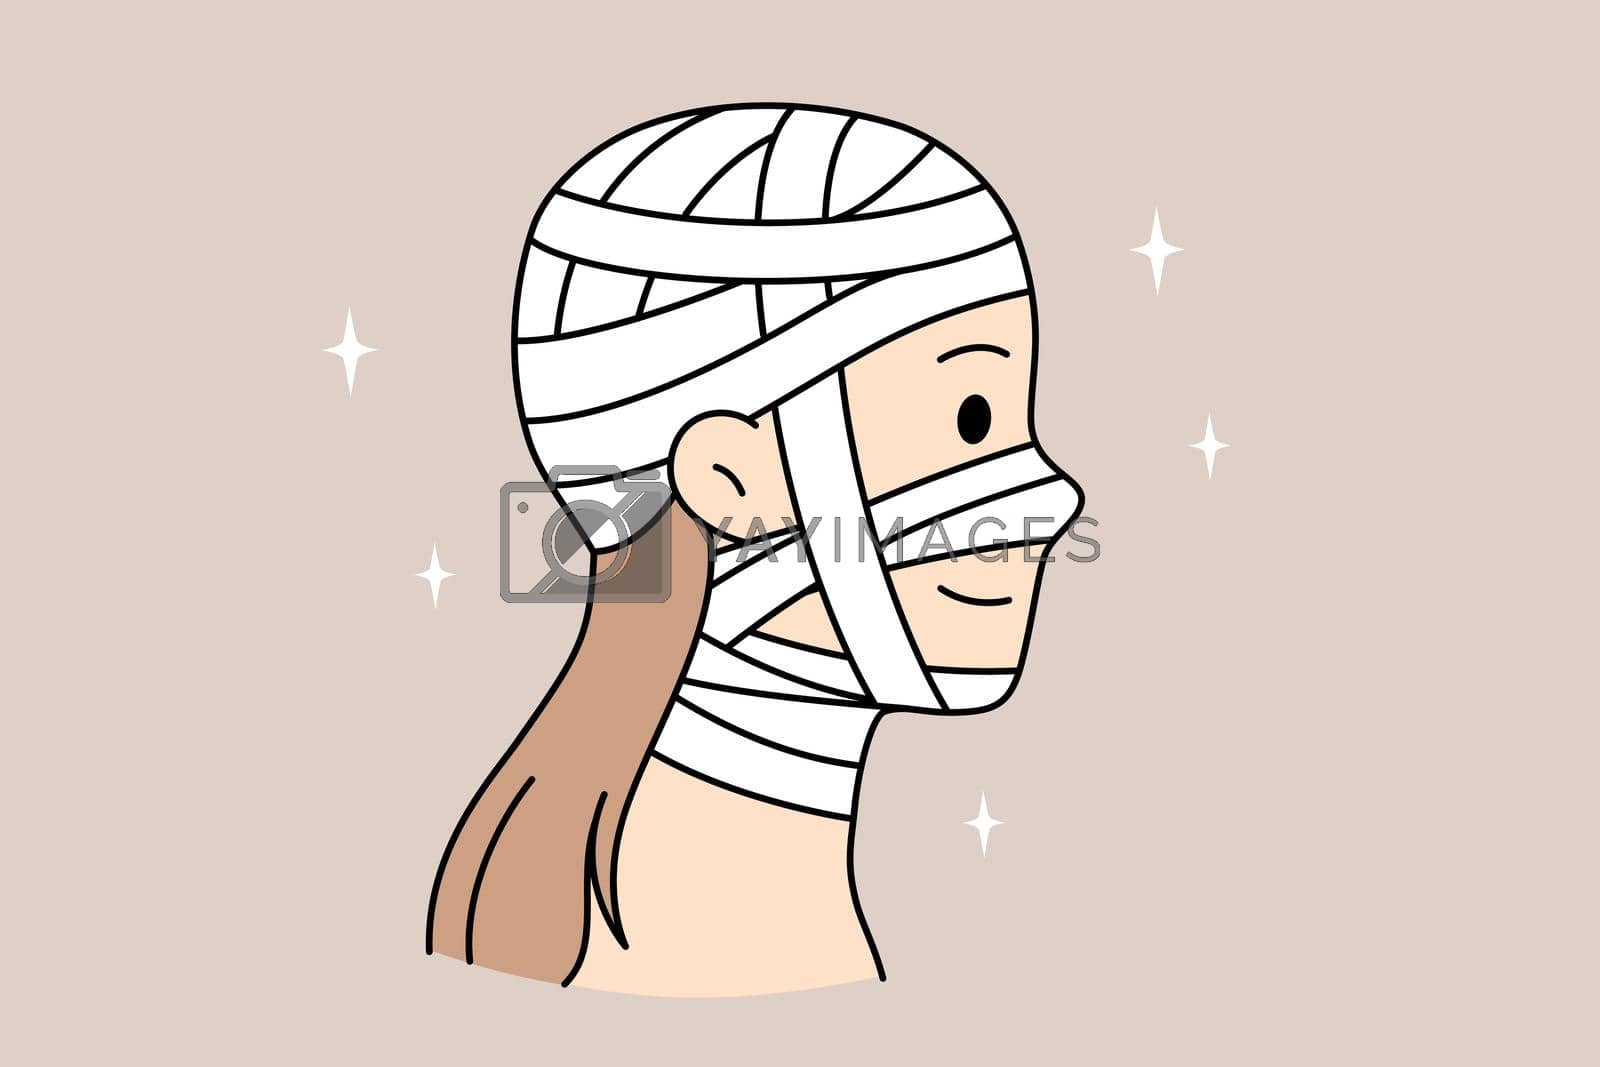 Head injury and healthcare concept. Head of young smiling woman cartoon character side view injured wrapped in bandages vector illustration